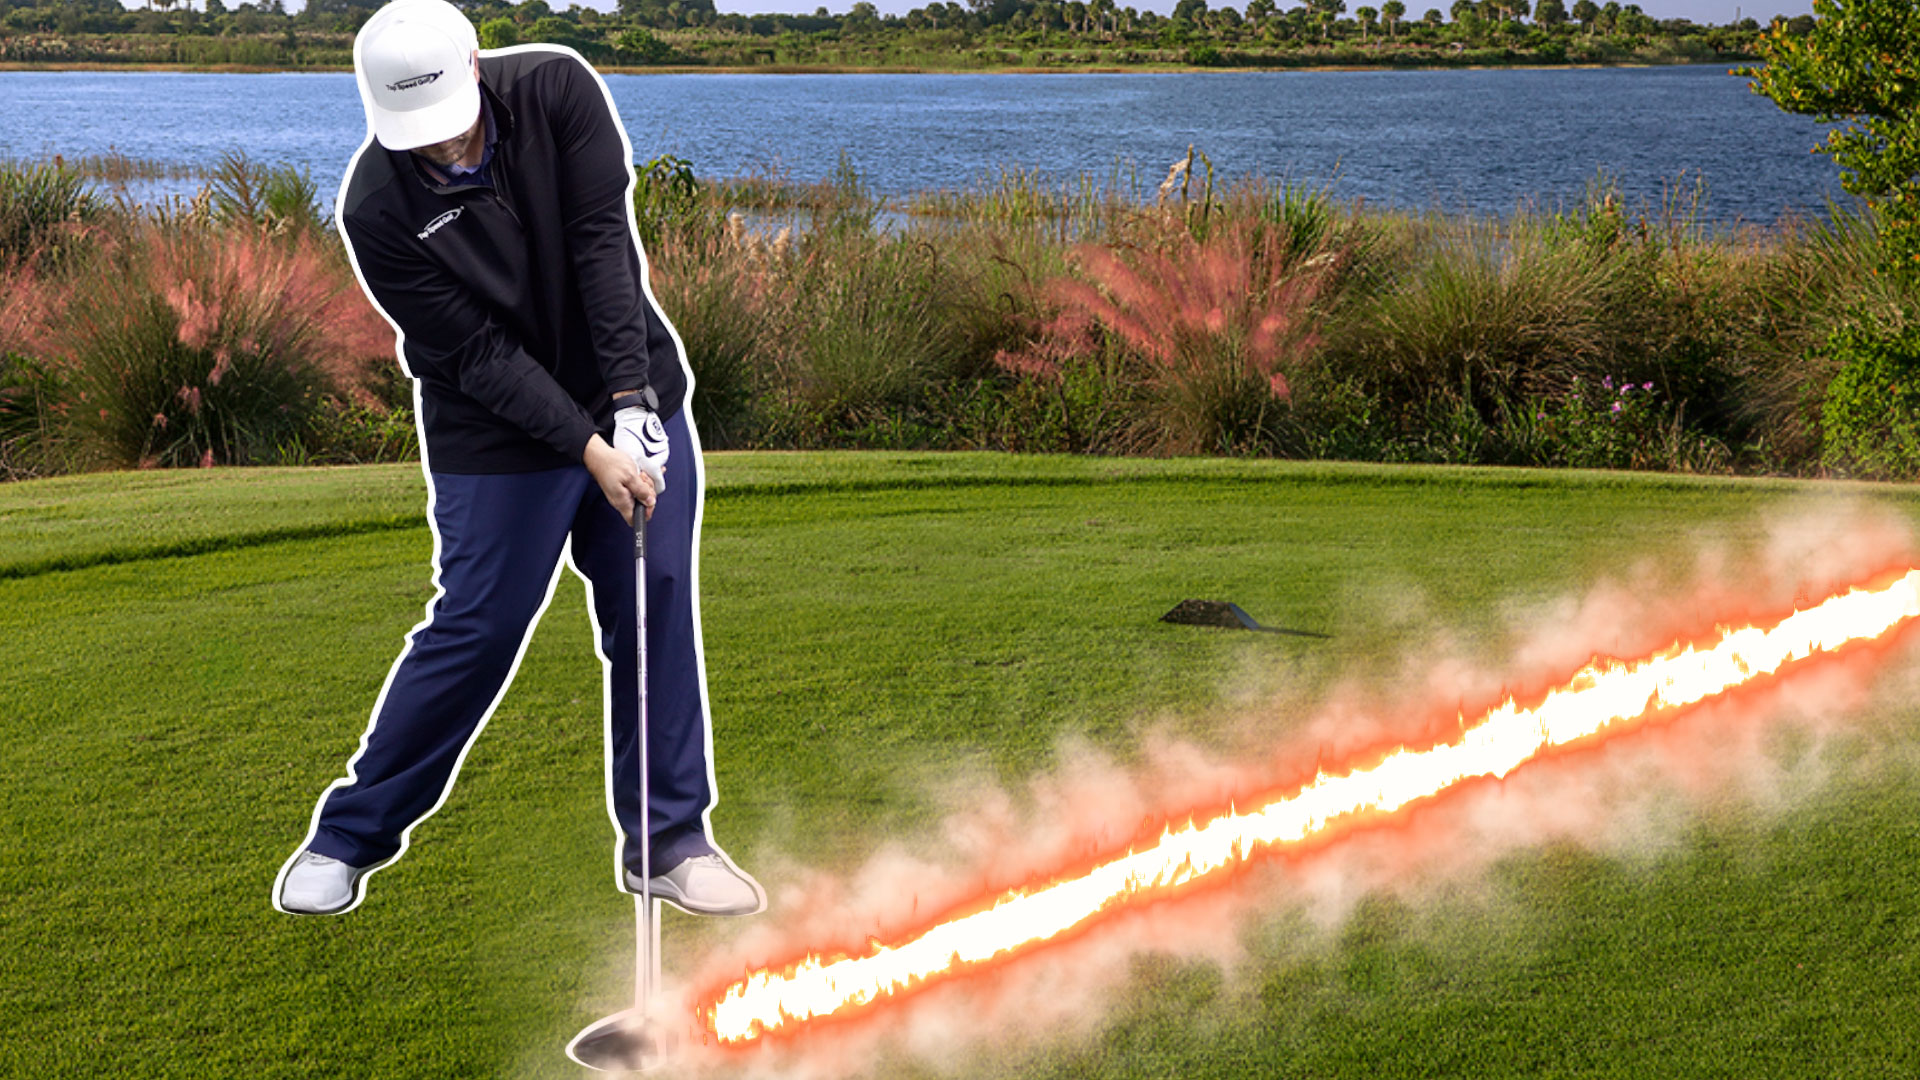 How To Find Easy Power In Your Golf Swing • Top Speed Golf